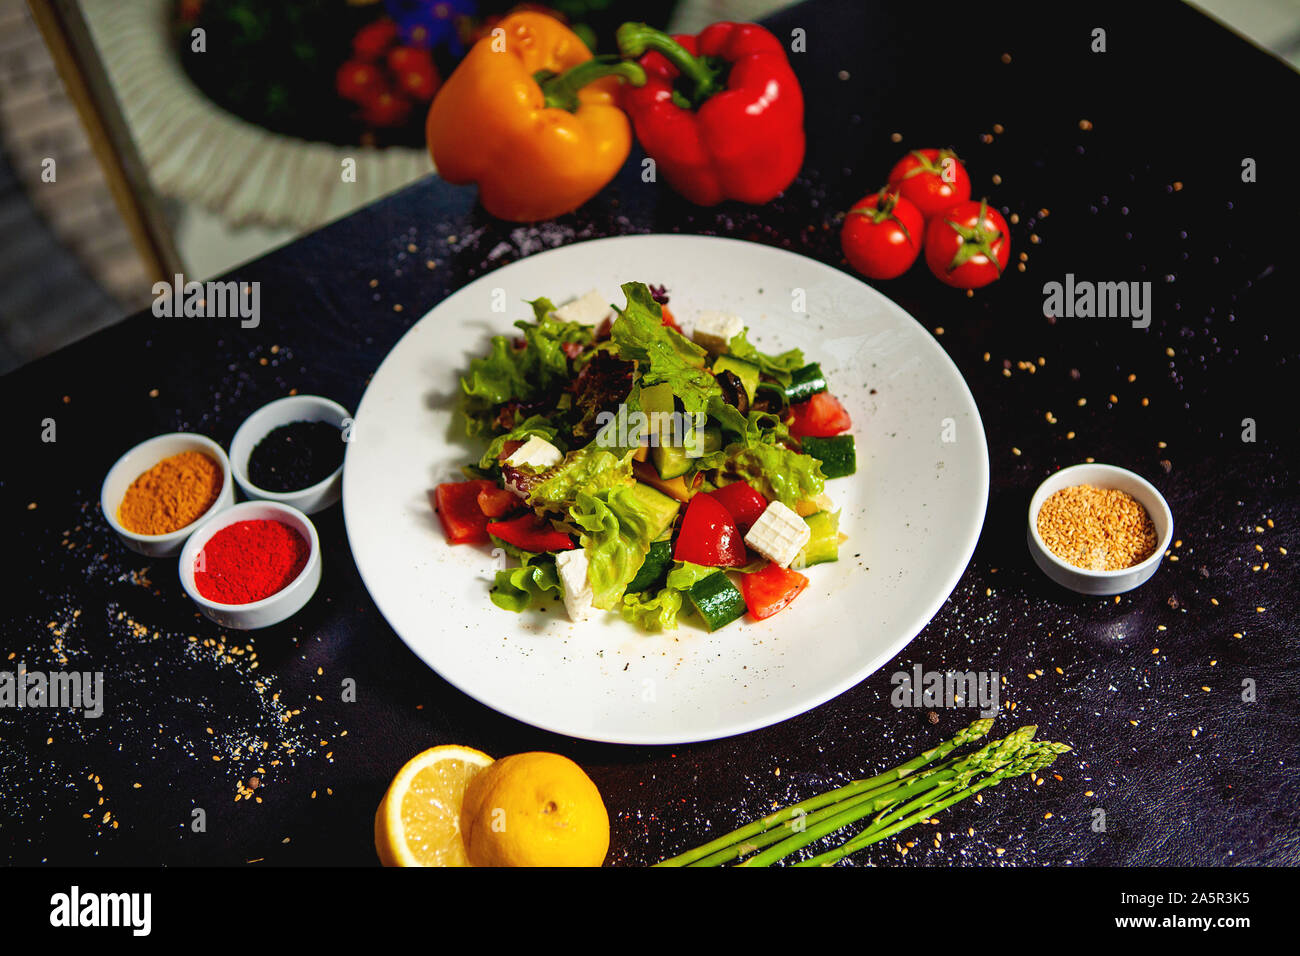 lettuce salad with white cheese, cucumber and tomato Stock Photo